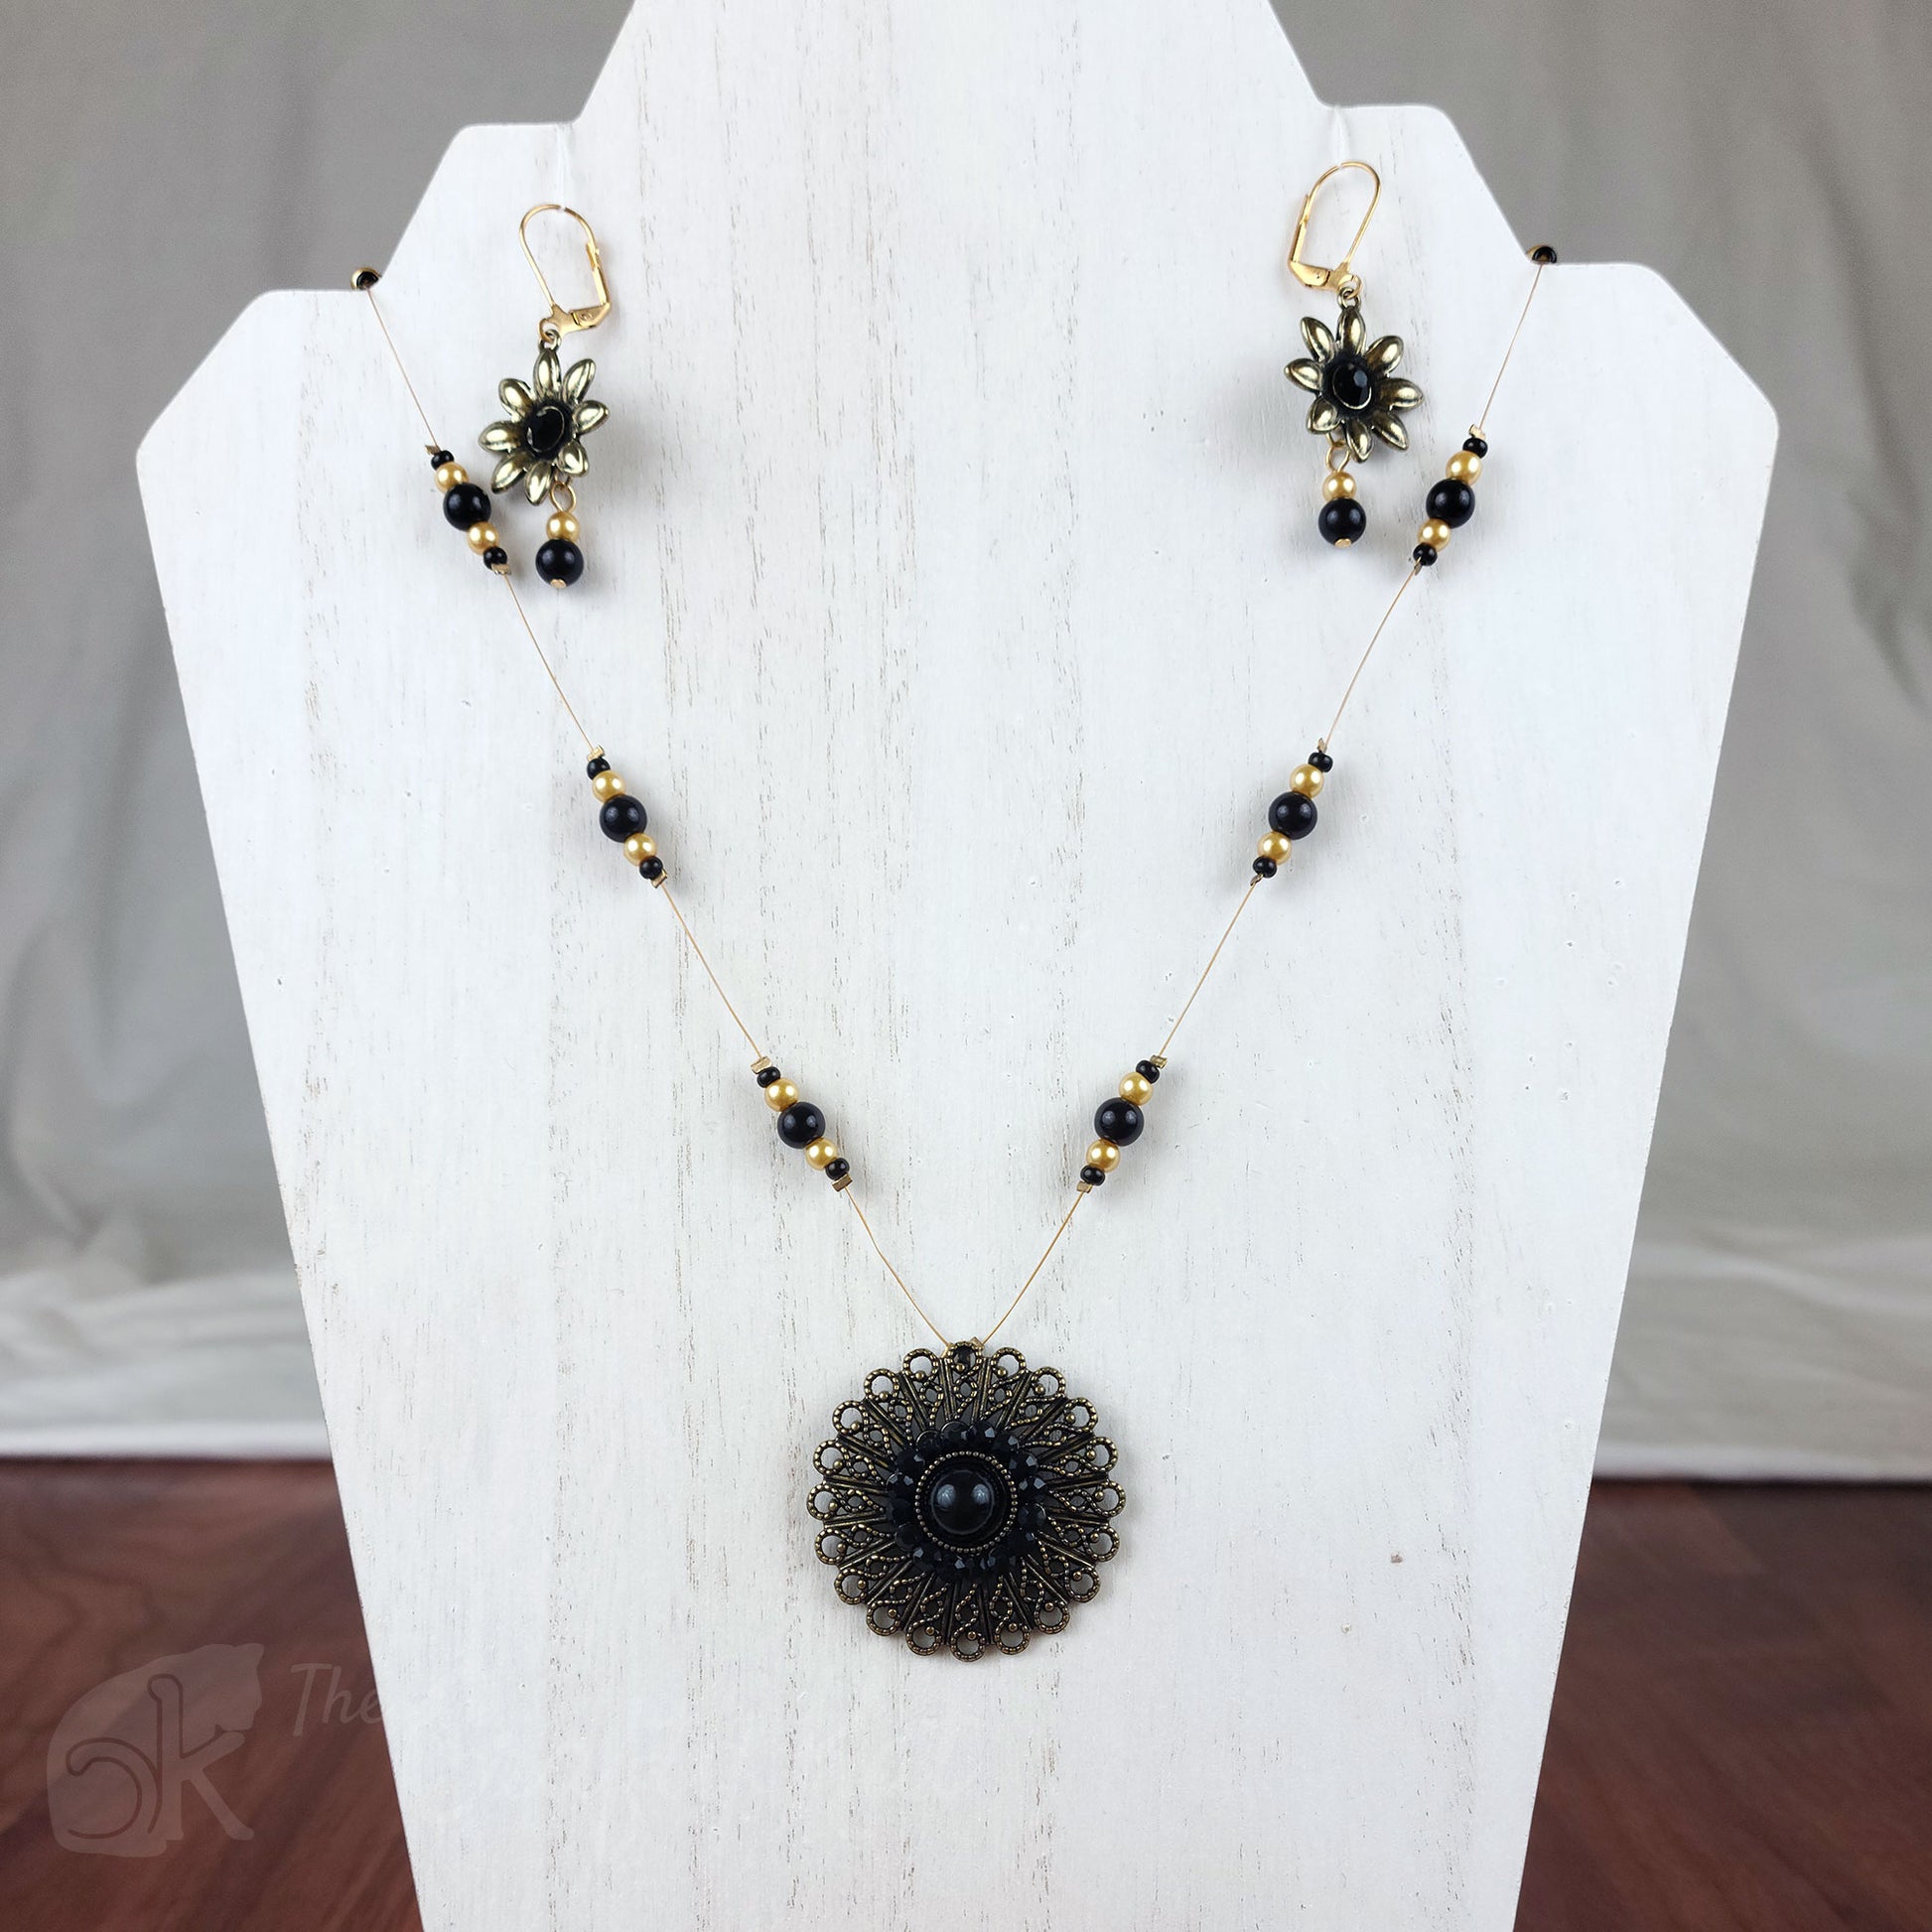 Necklace and earring set featuring antique gold flower-shaped focal pieces with black cabochons and black and gold glass pearls strung on antique gold tigertail.